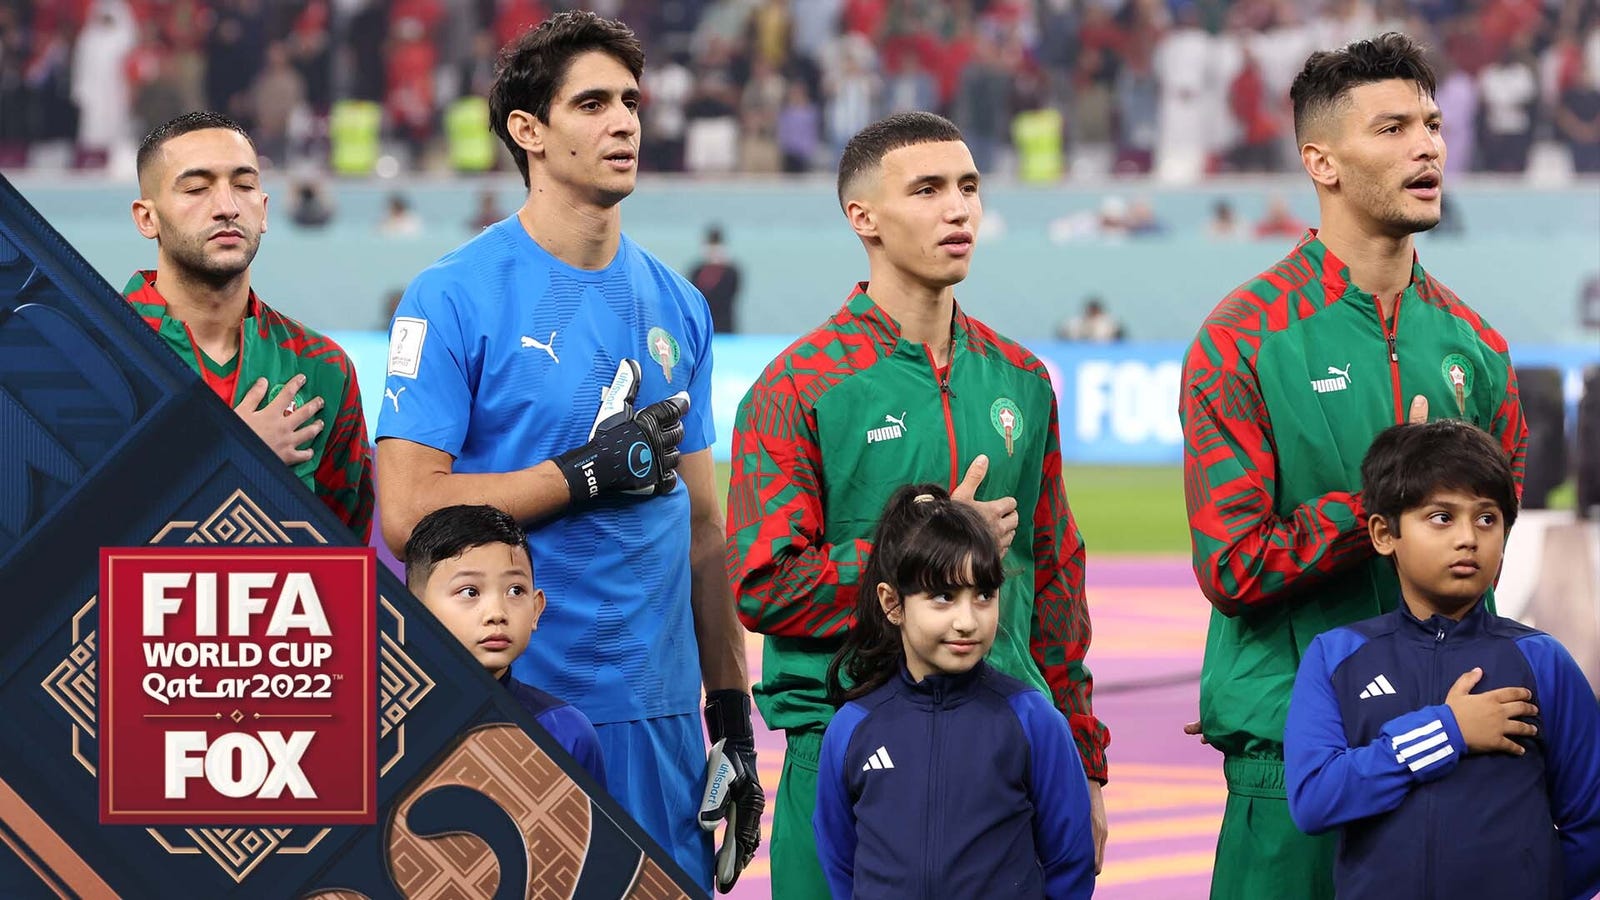 Exit Croatia and Morocco and their national anthems before the match for third place